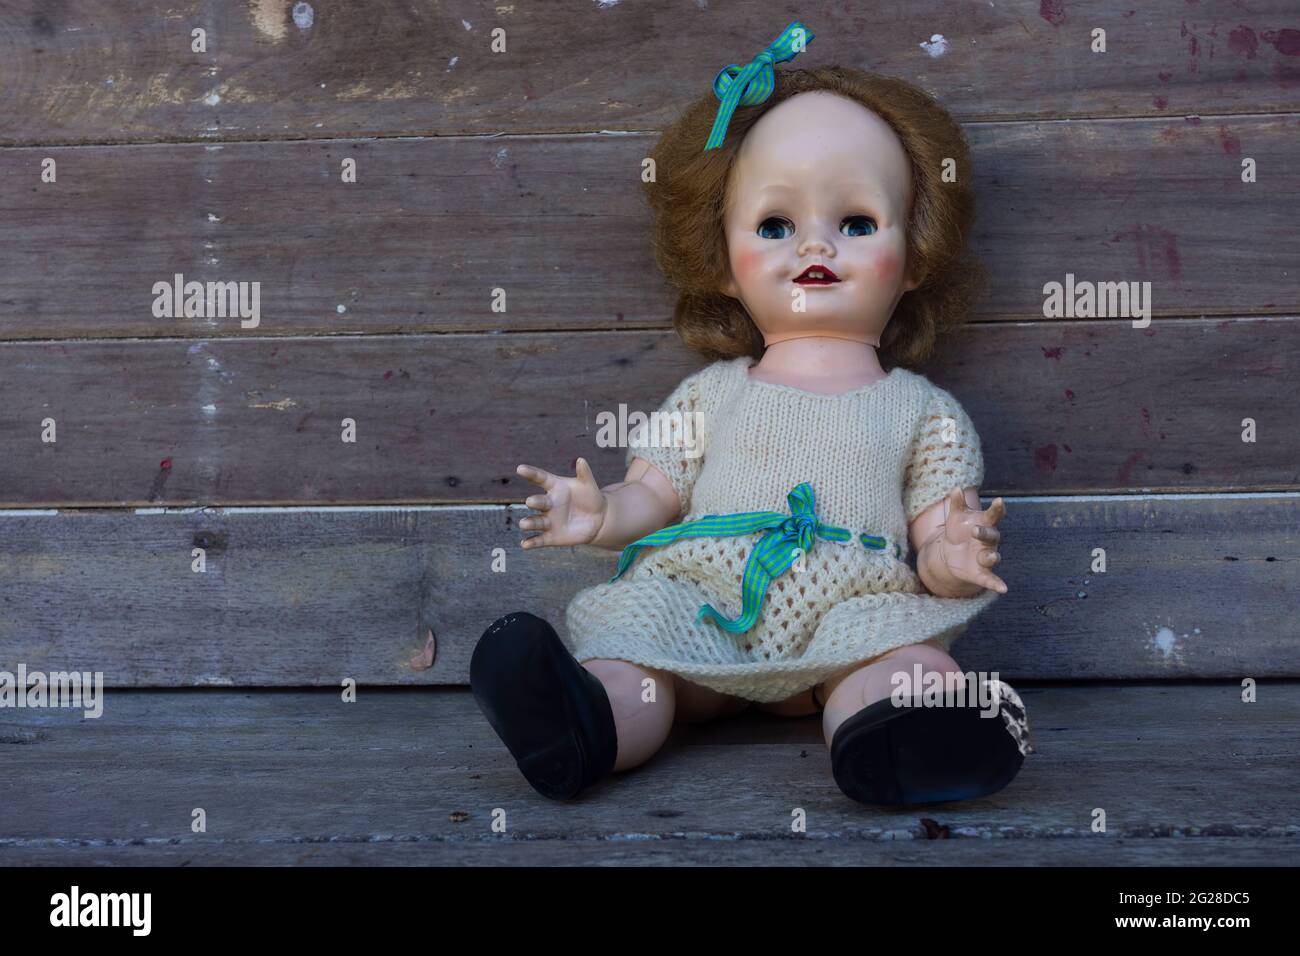 Scary creepy old vintage doll with staring eyes and blond hair in a knitted dress against a rustic background with copy space. Stock Photo